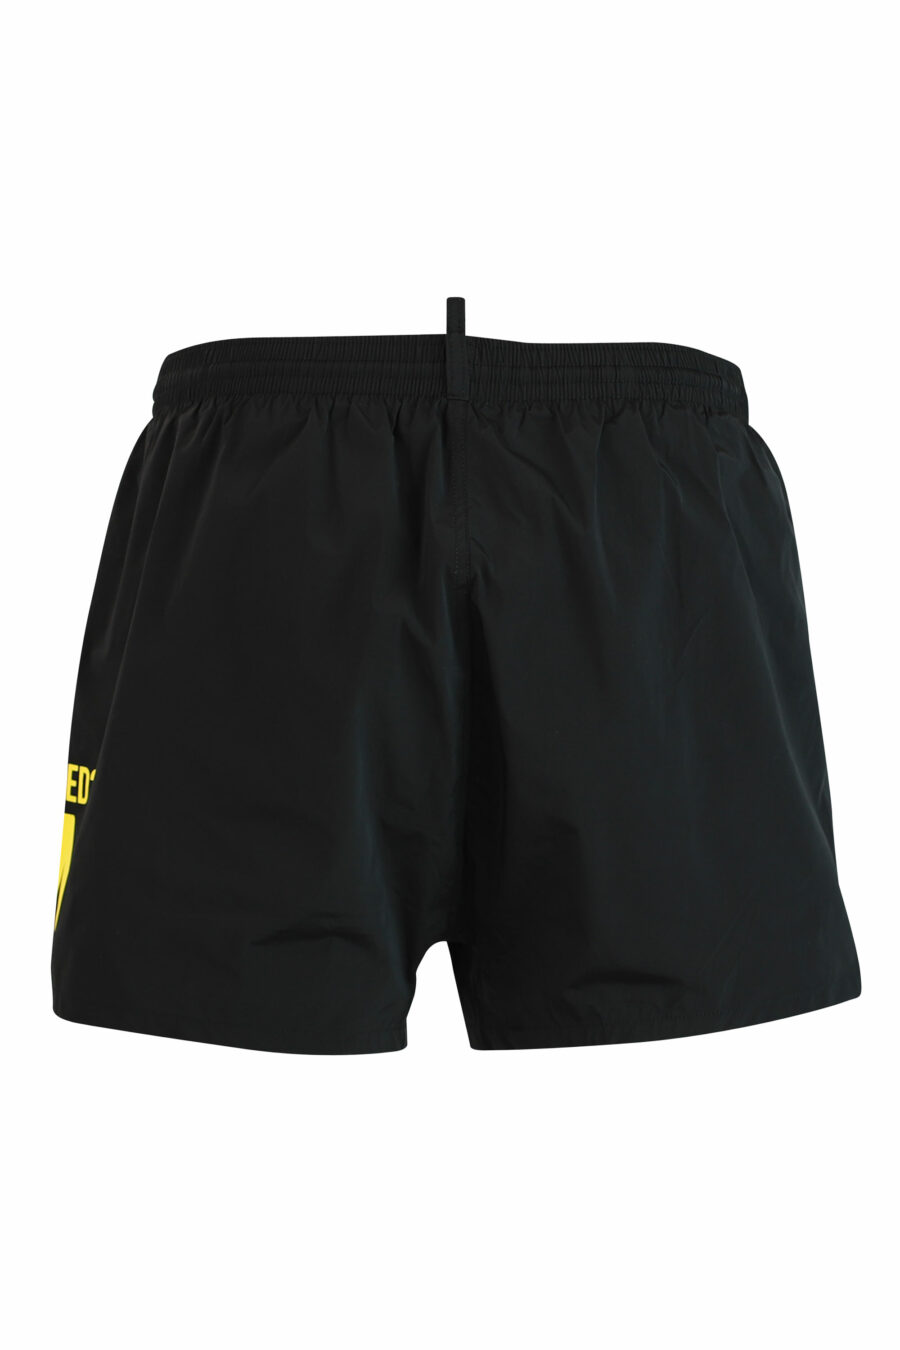 Black midi swimming costume with yellow "icon" logo on the side - IMG 1128